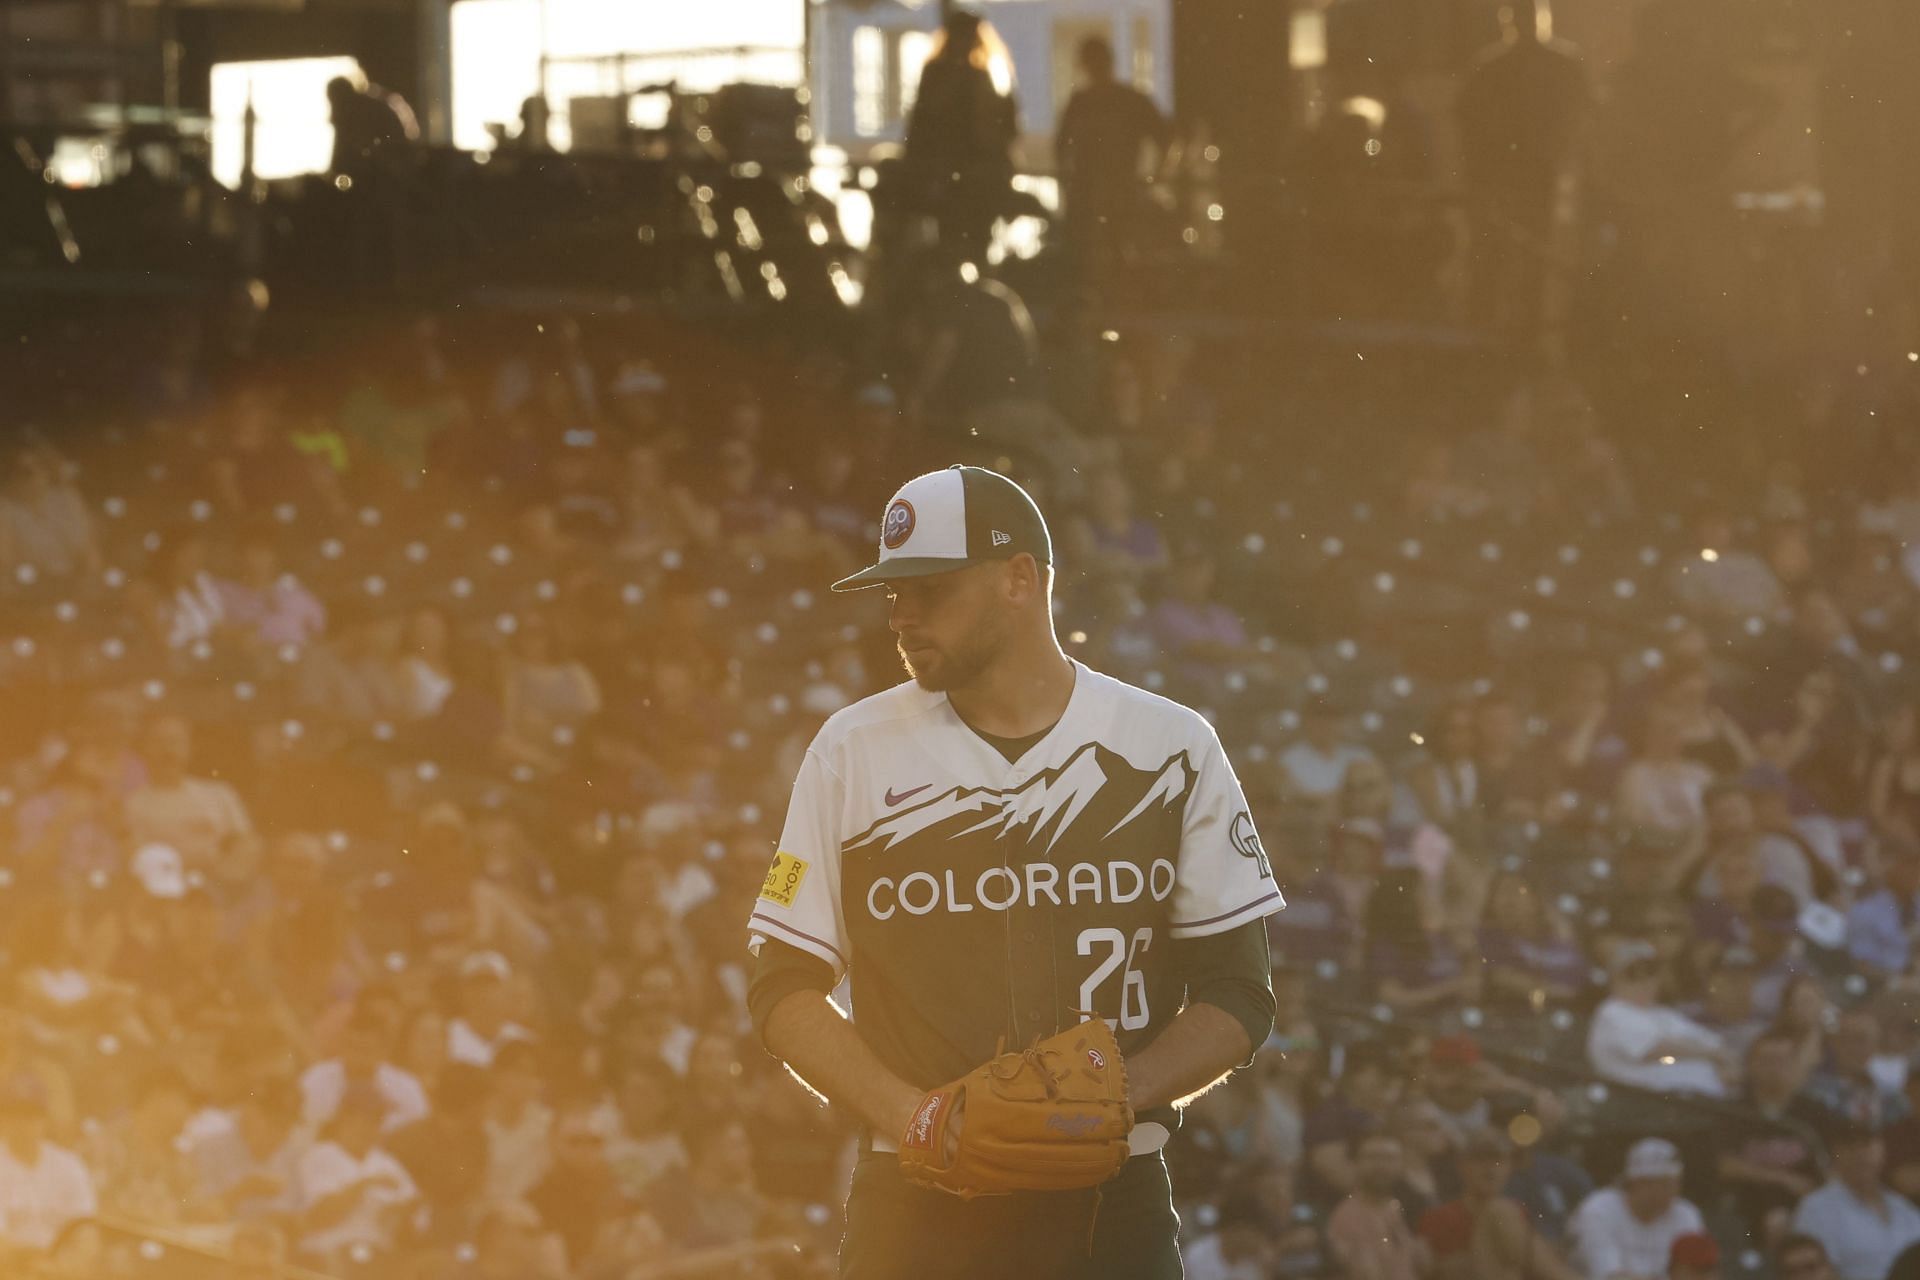 The Rockies try to pick up a win before welcoming the division rival Padres to town.